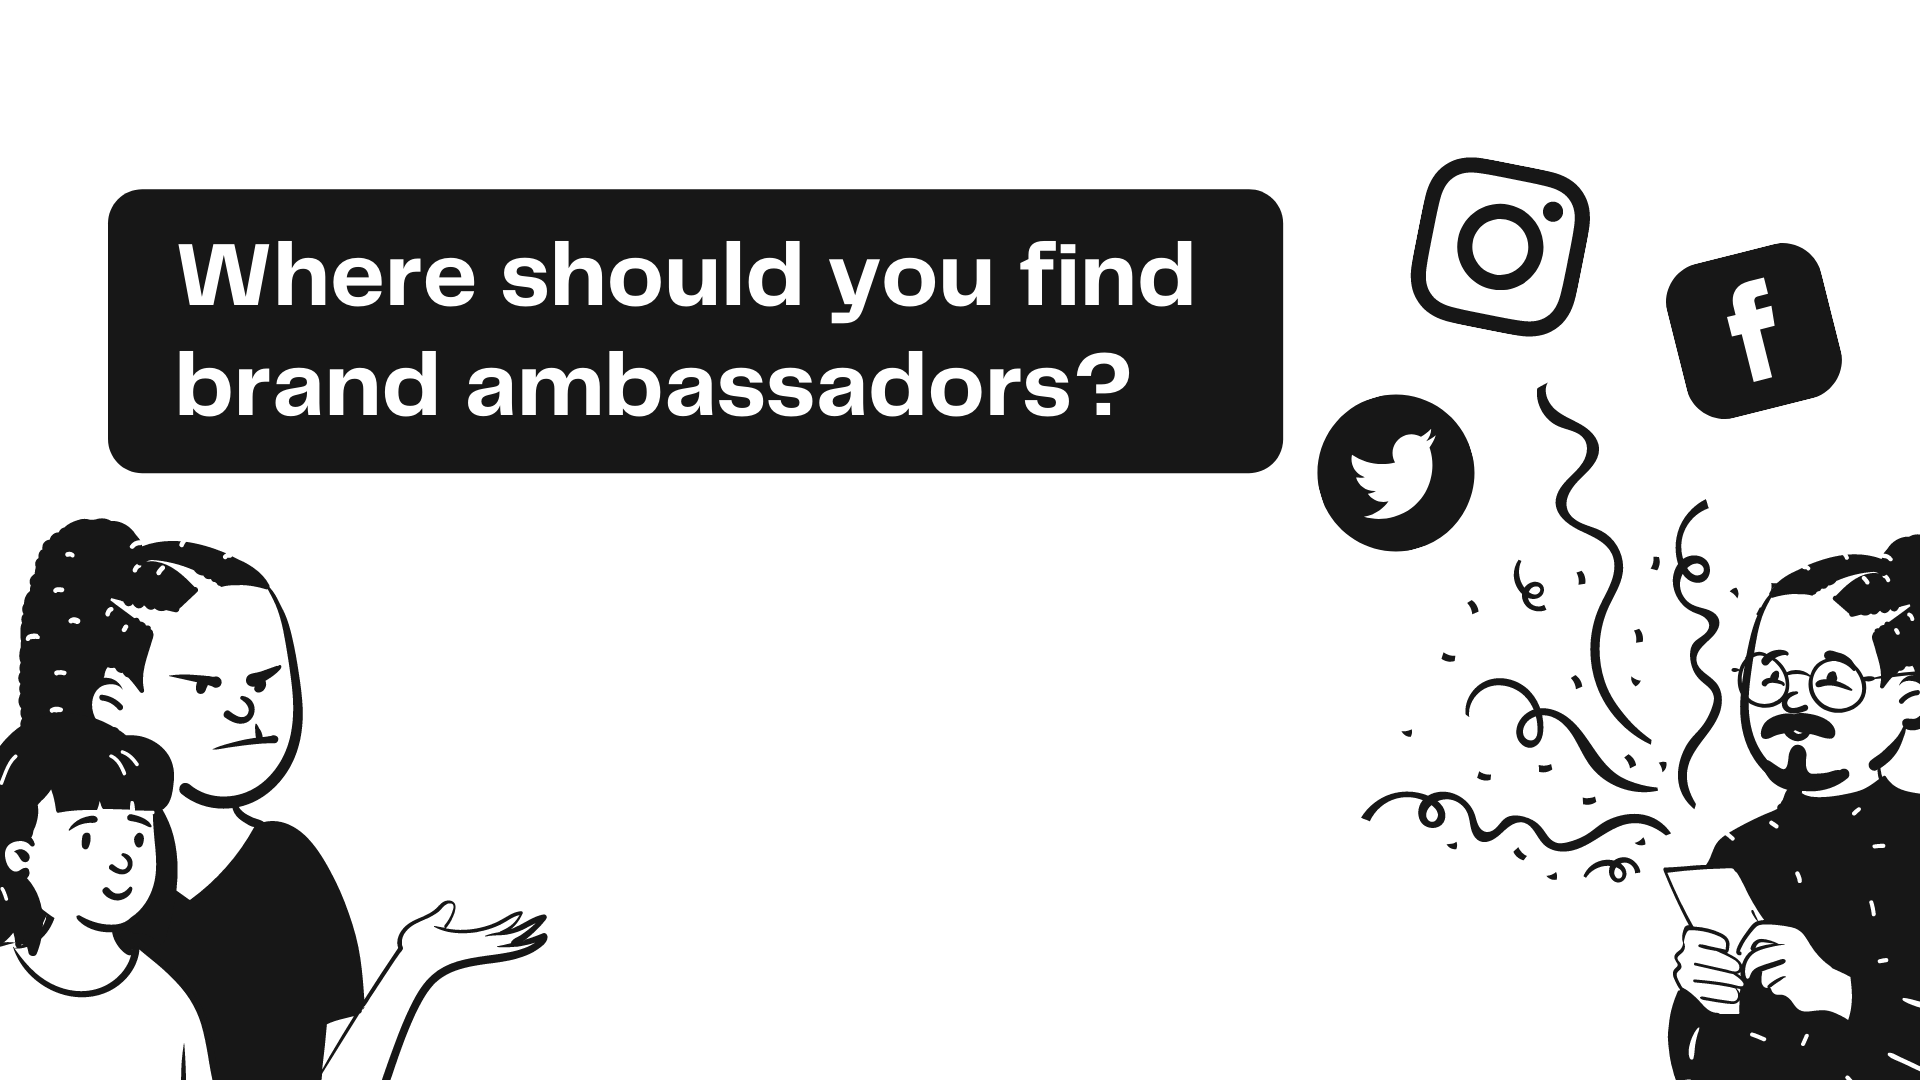 Where can you find brand ambassadors